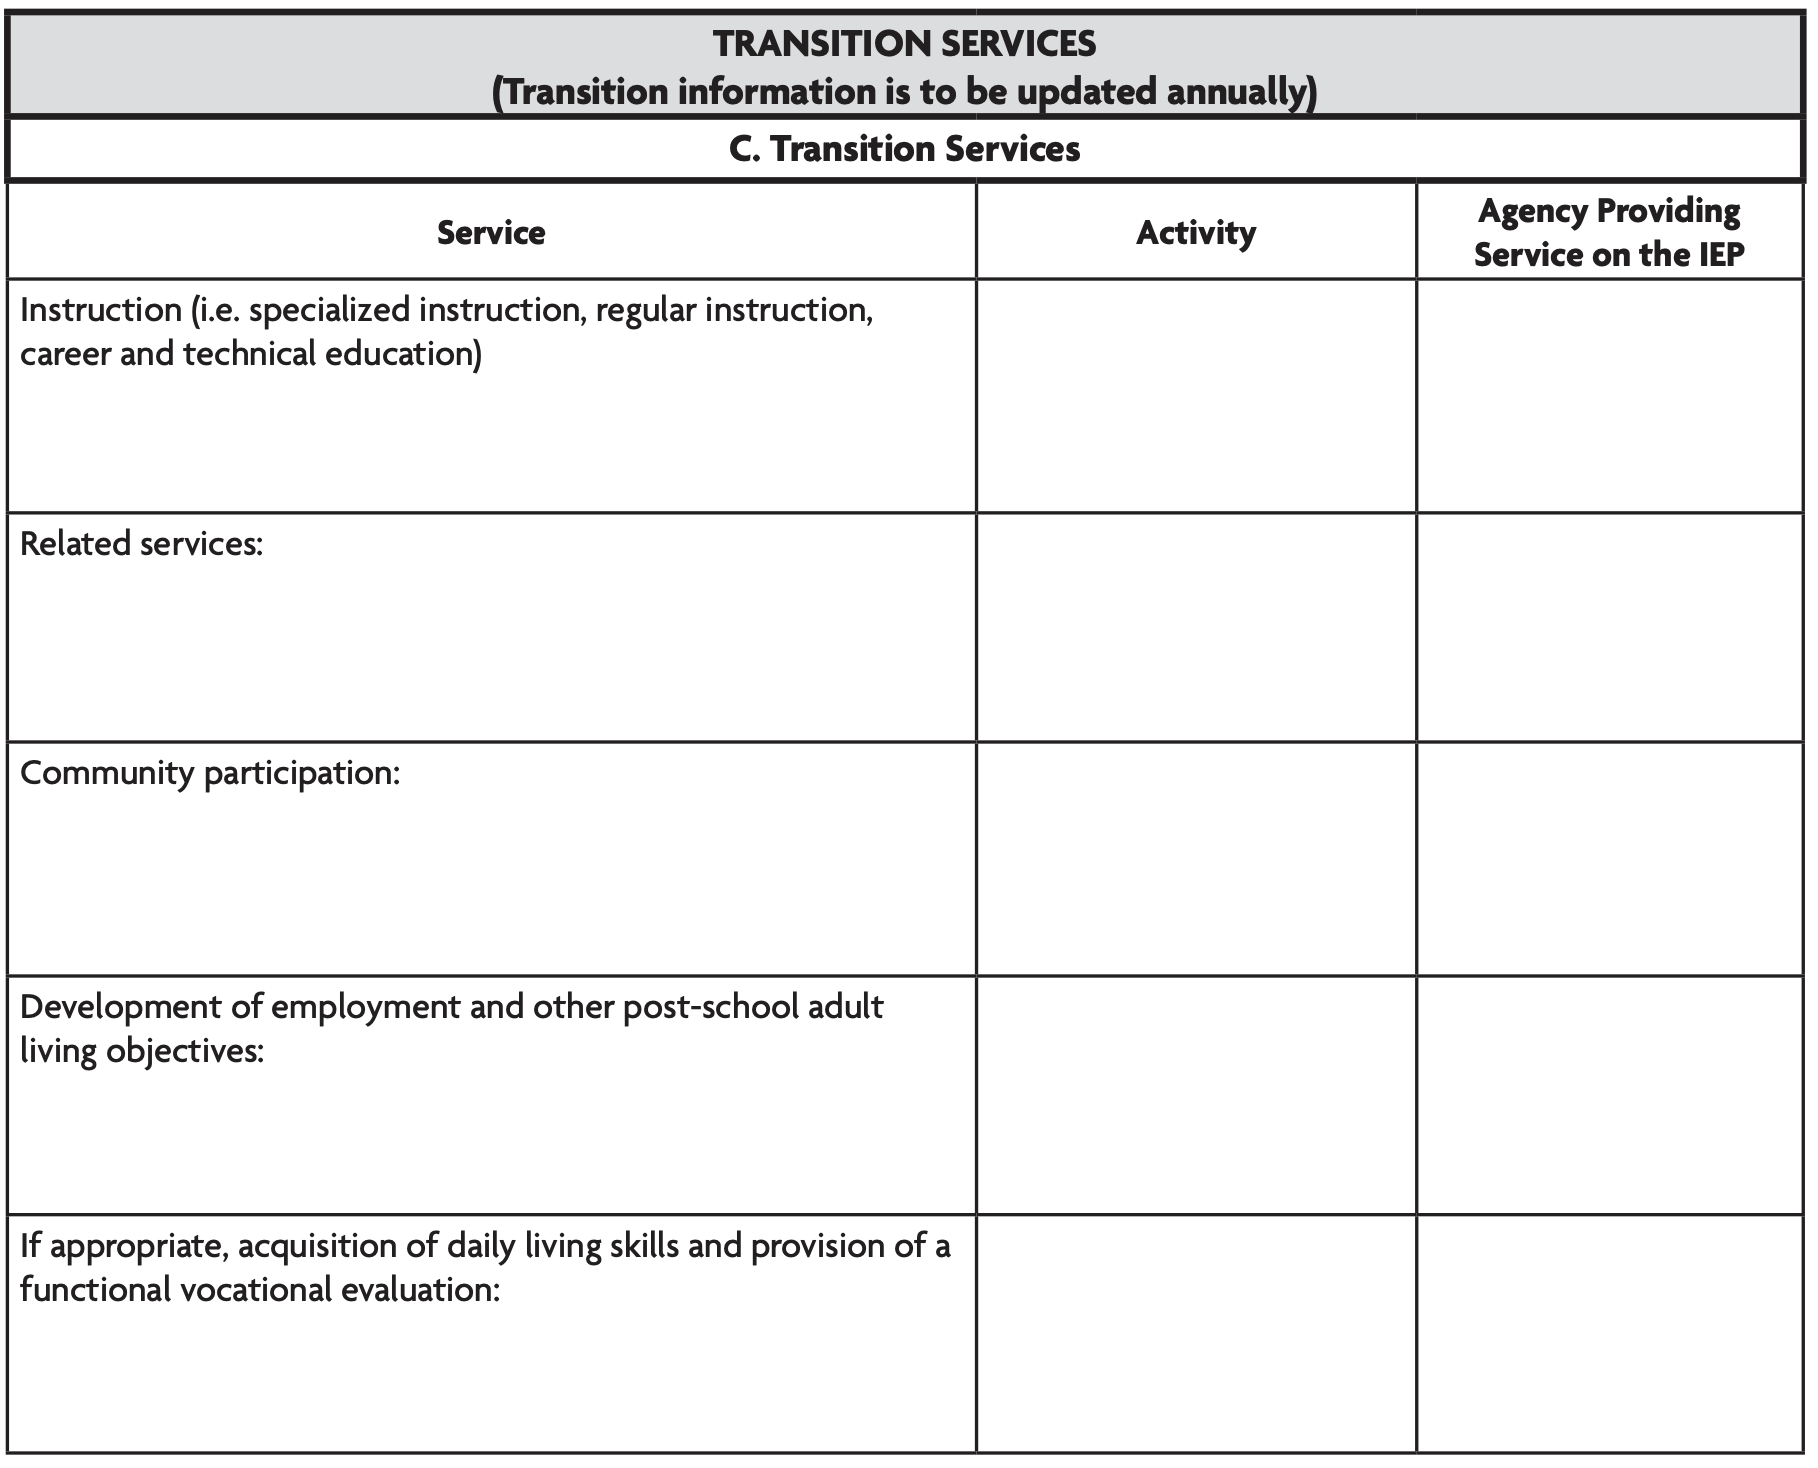 Image is a table made to be filled in with information about transition services, activity, and agency providing the service. Services include: instruction (i.e. specialized instruction, regular instruction, career and technical education), related services, community participation, development of employment and other post-school adult living objectives, and if appropriate, acquisition of daily living skills and provision of a functional vocational evaluation.